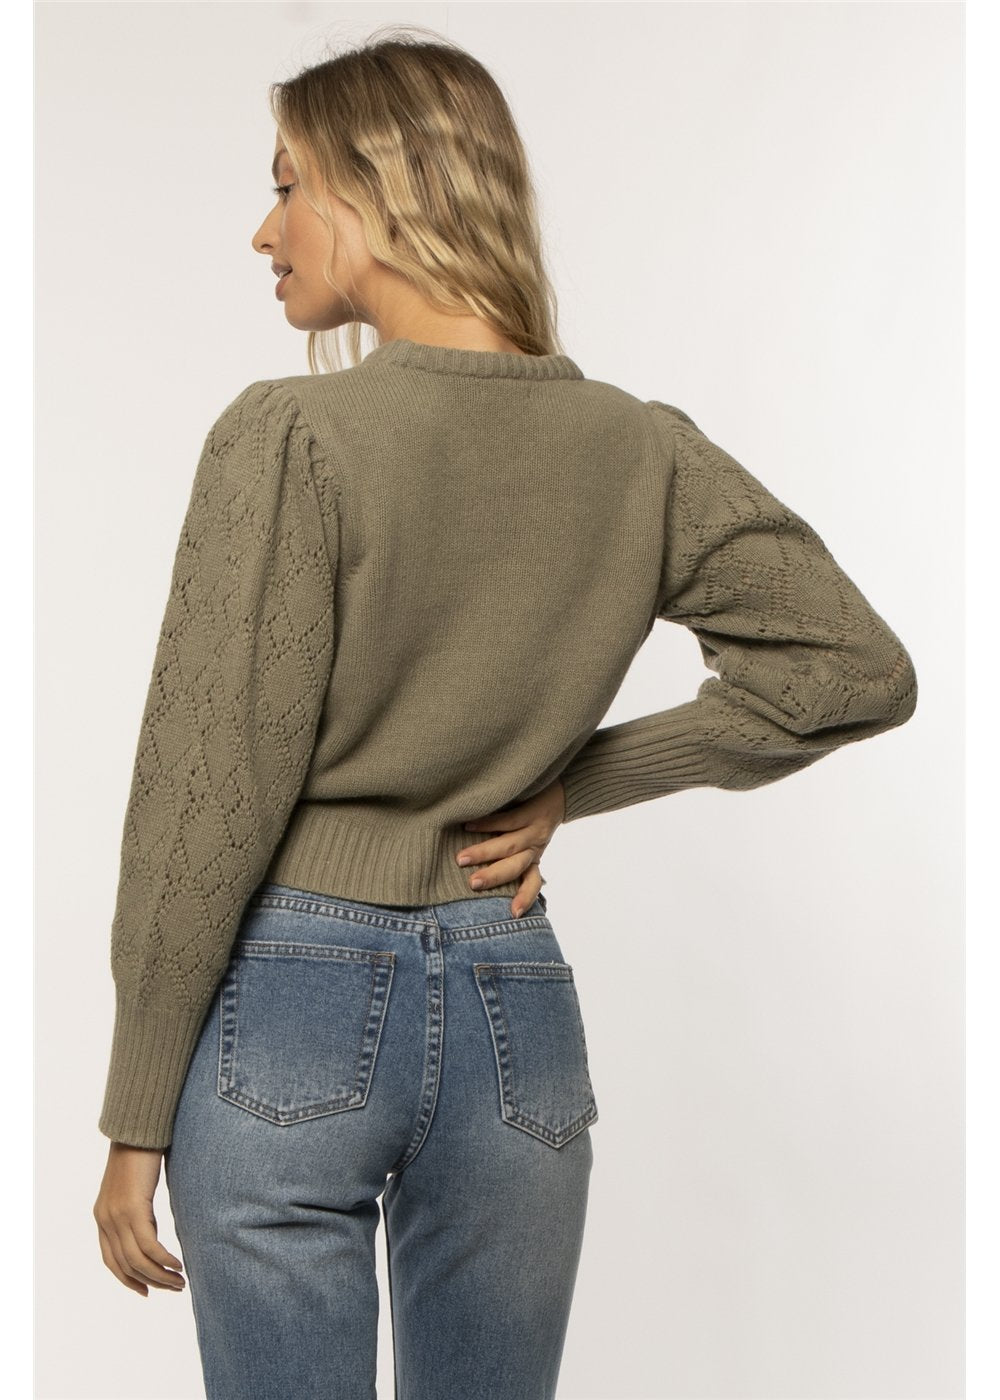 Amuse Society Women's Noha Long Sleeve Sweater in Willow. back view